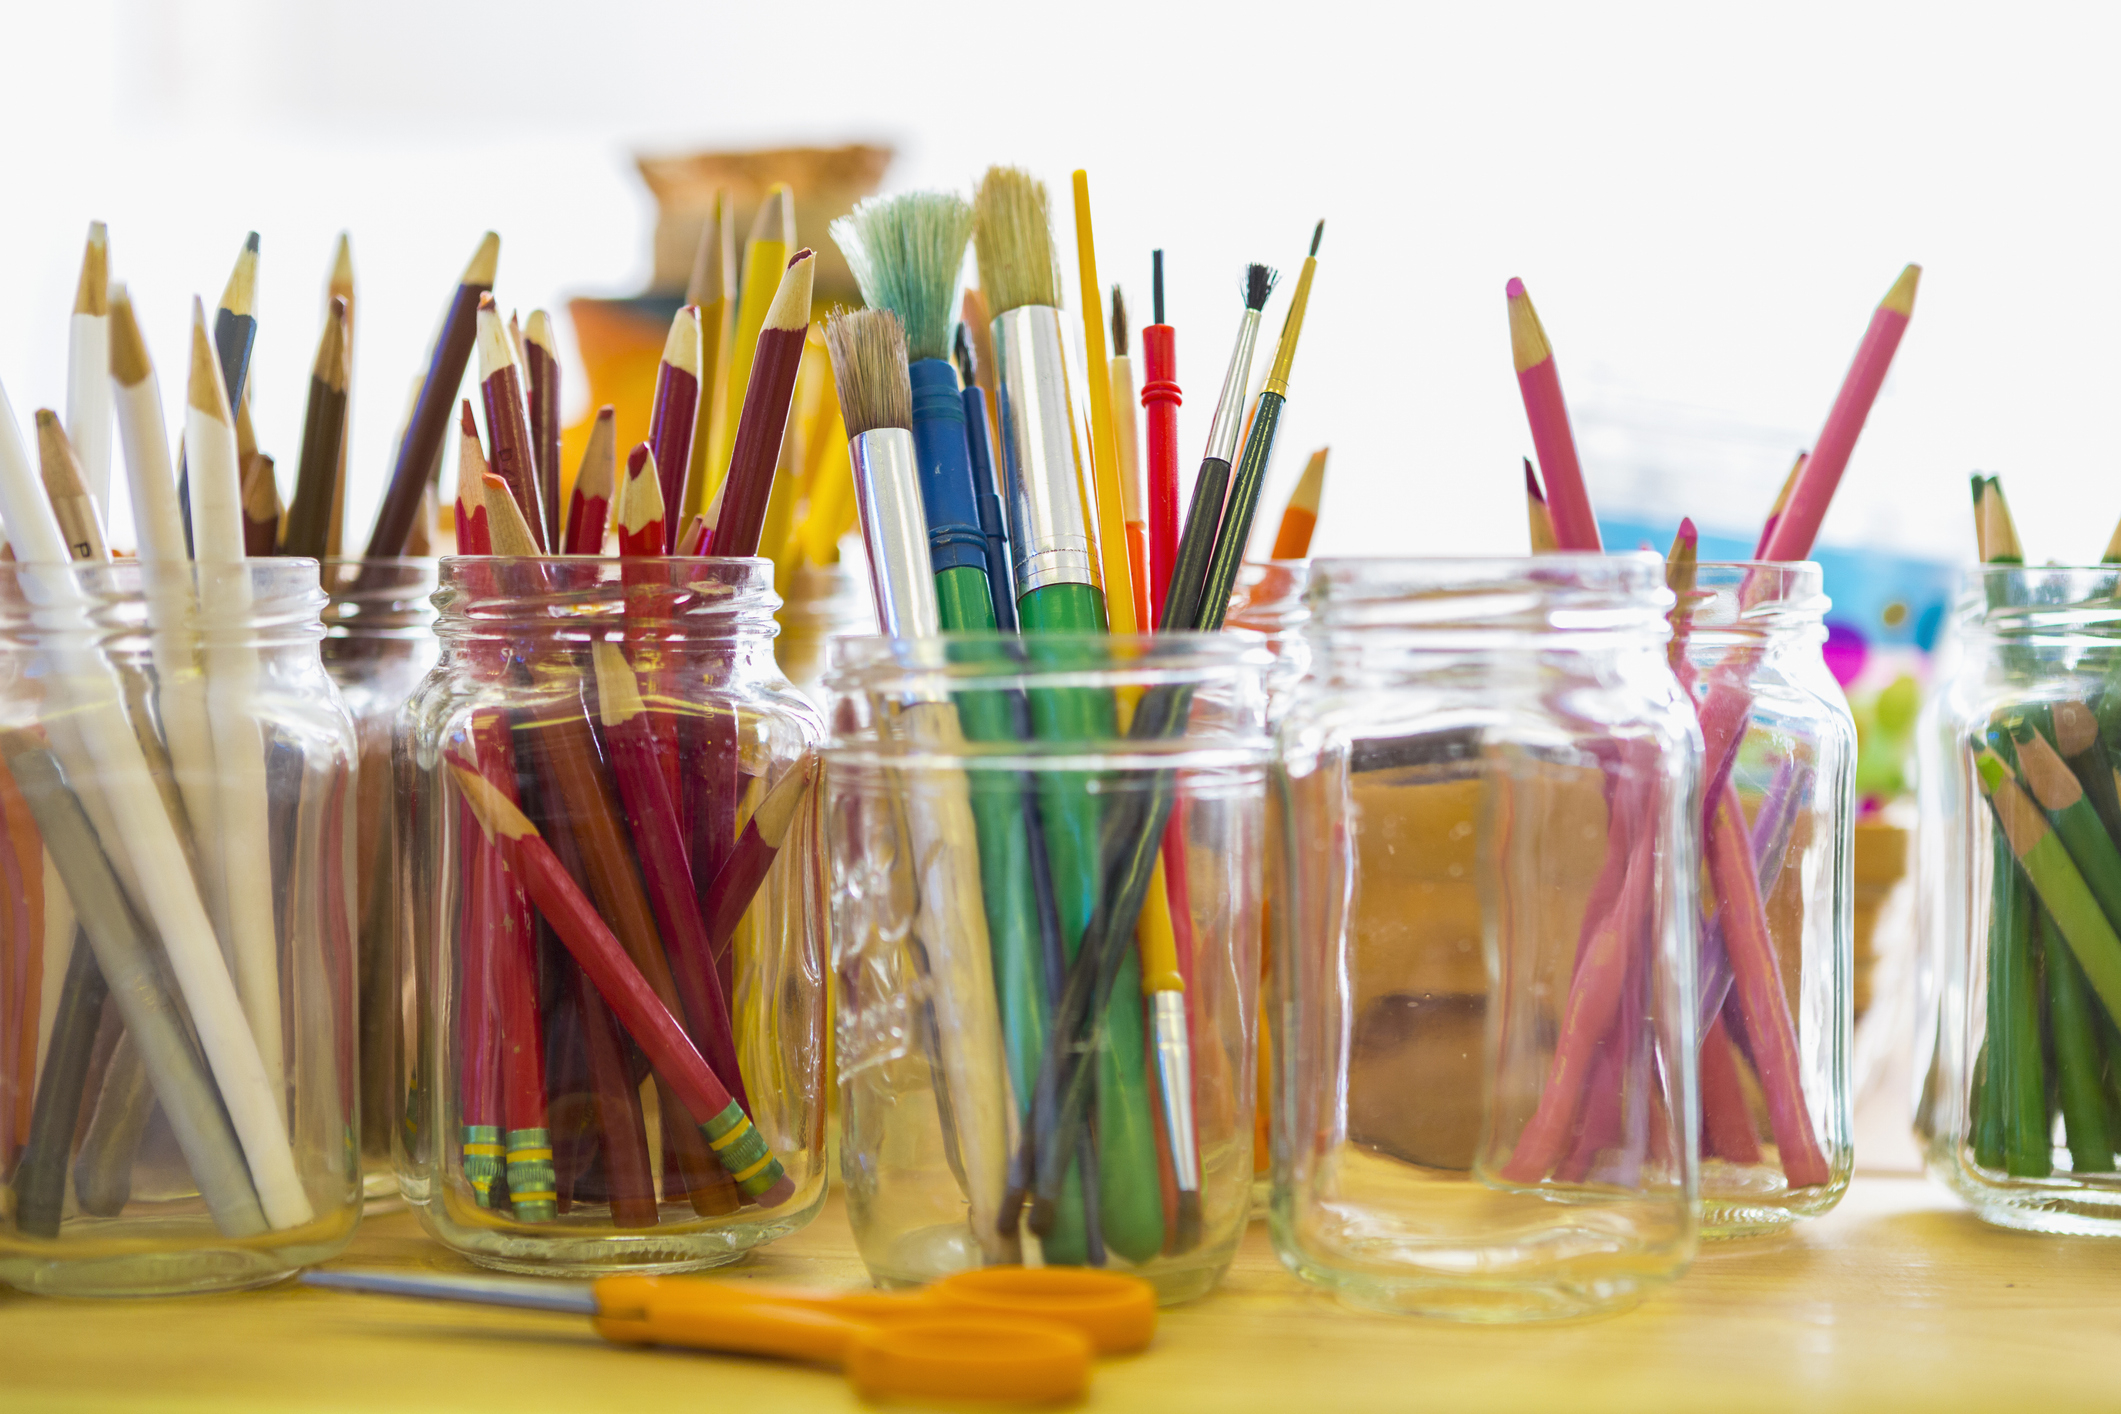 Mason jars filled with various art supplies like pencils, paintbrushes, and markers on a table; orange scissors are seen in the foreground